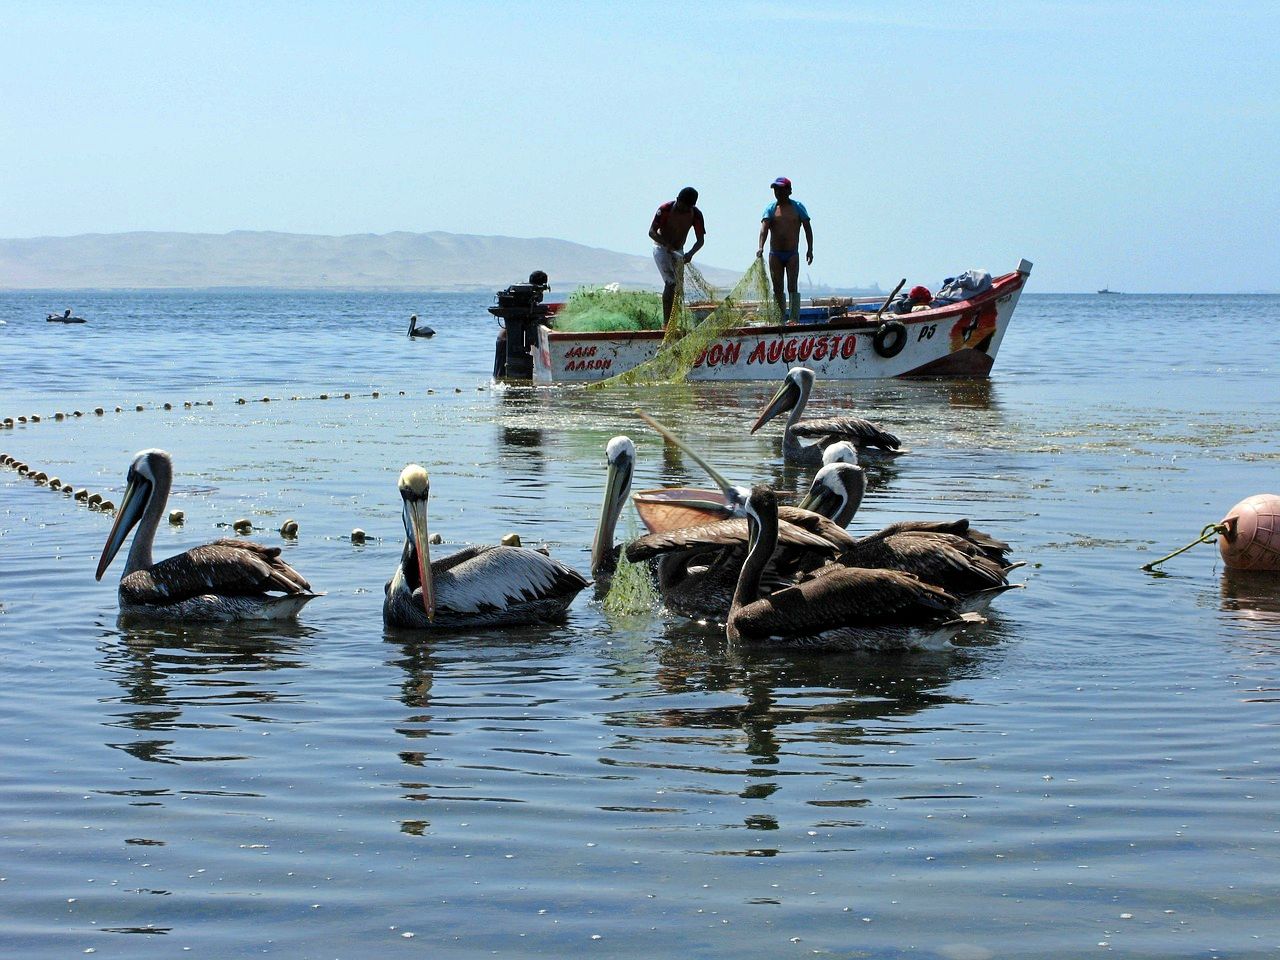 Pelicans and fishermen on the Paracas Peninsula